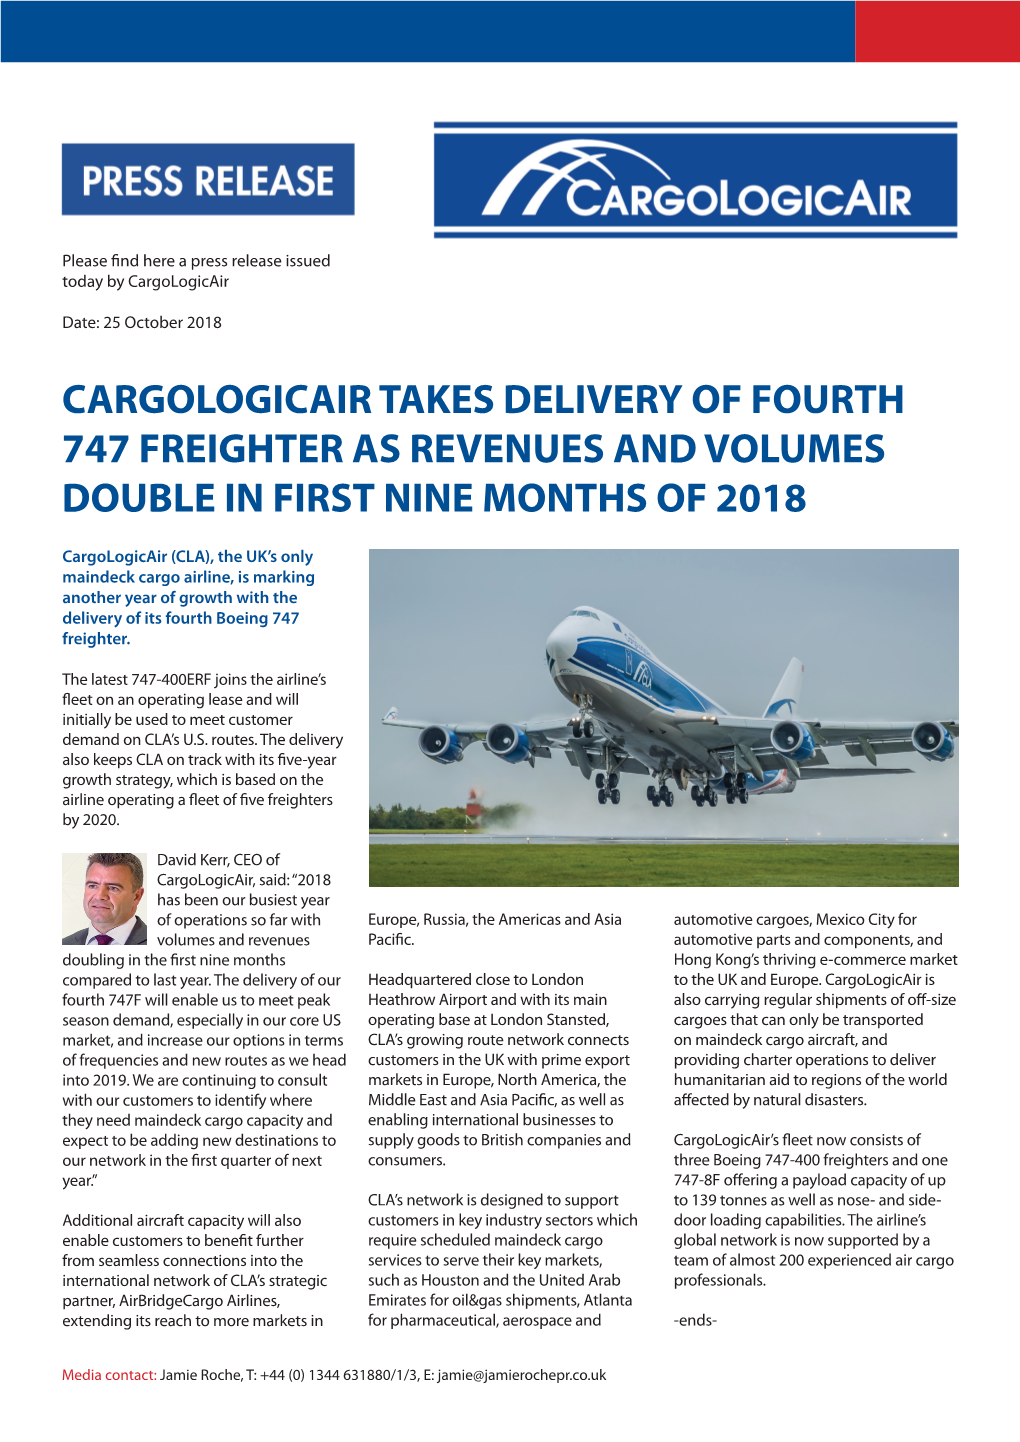 Cargologicair Takes Delivery of Fourth 747 Freighter As Revenues and Volumes Double in First Nine Months of 2018